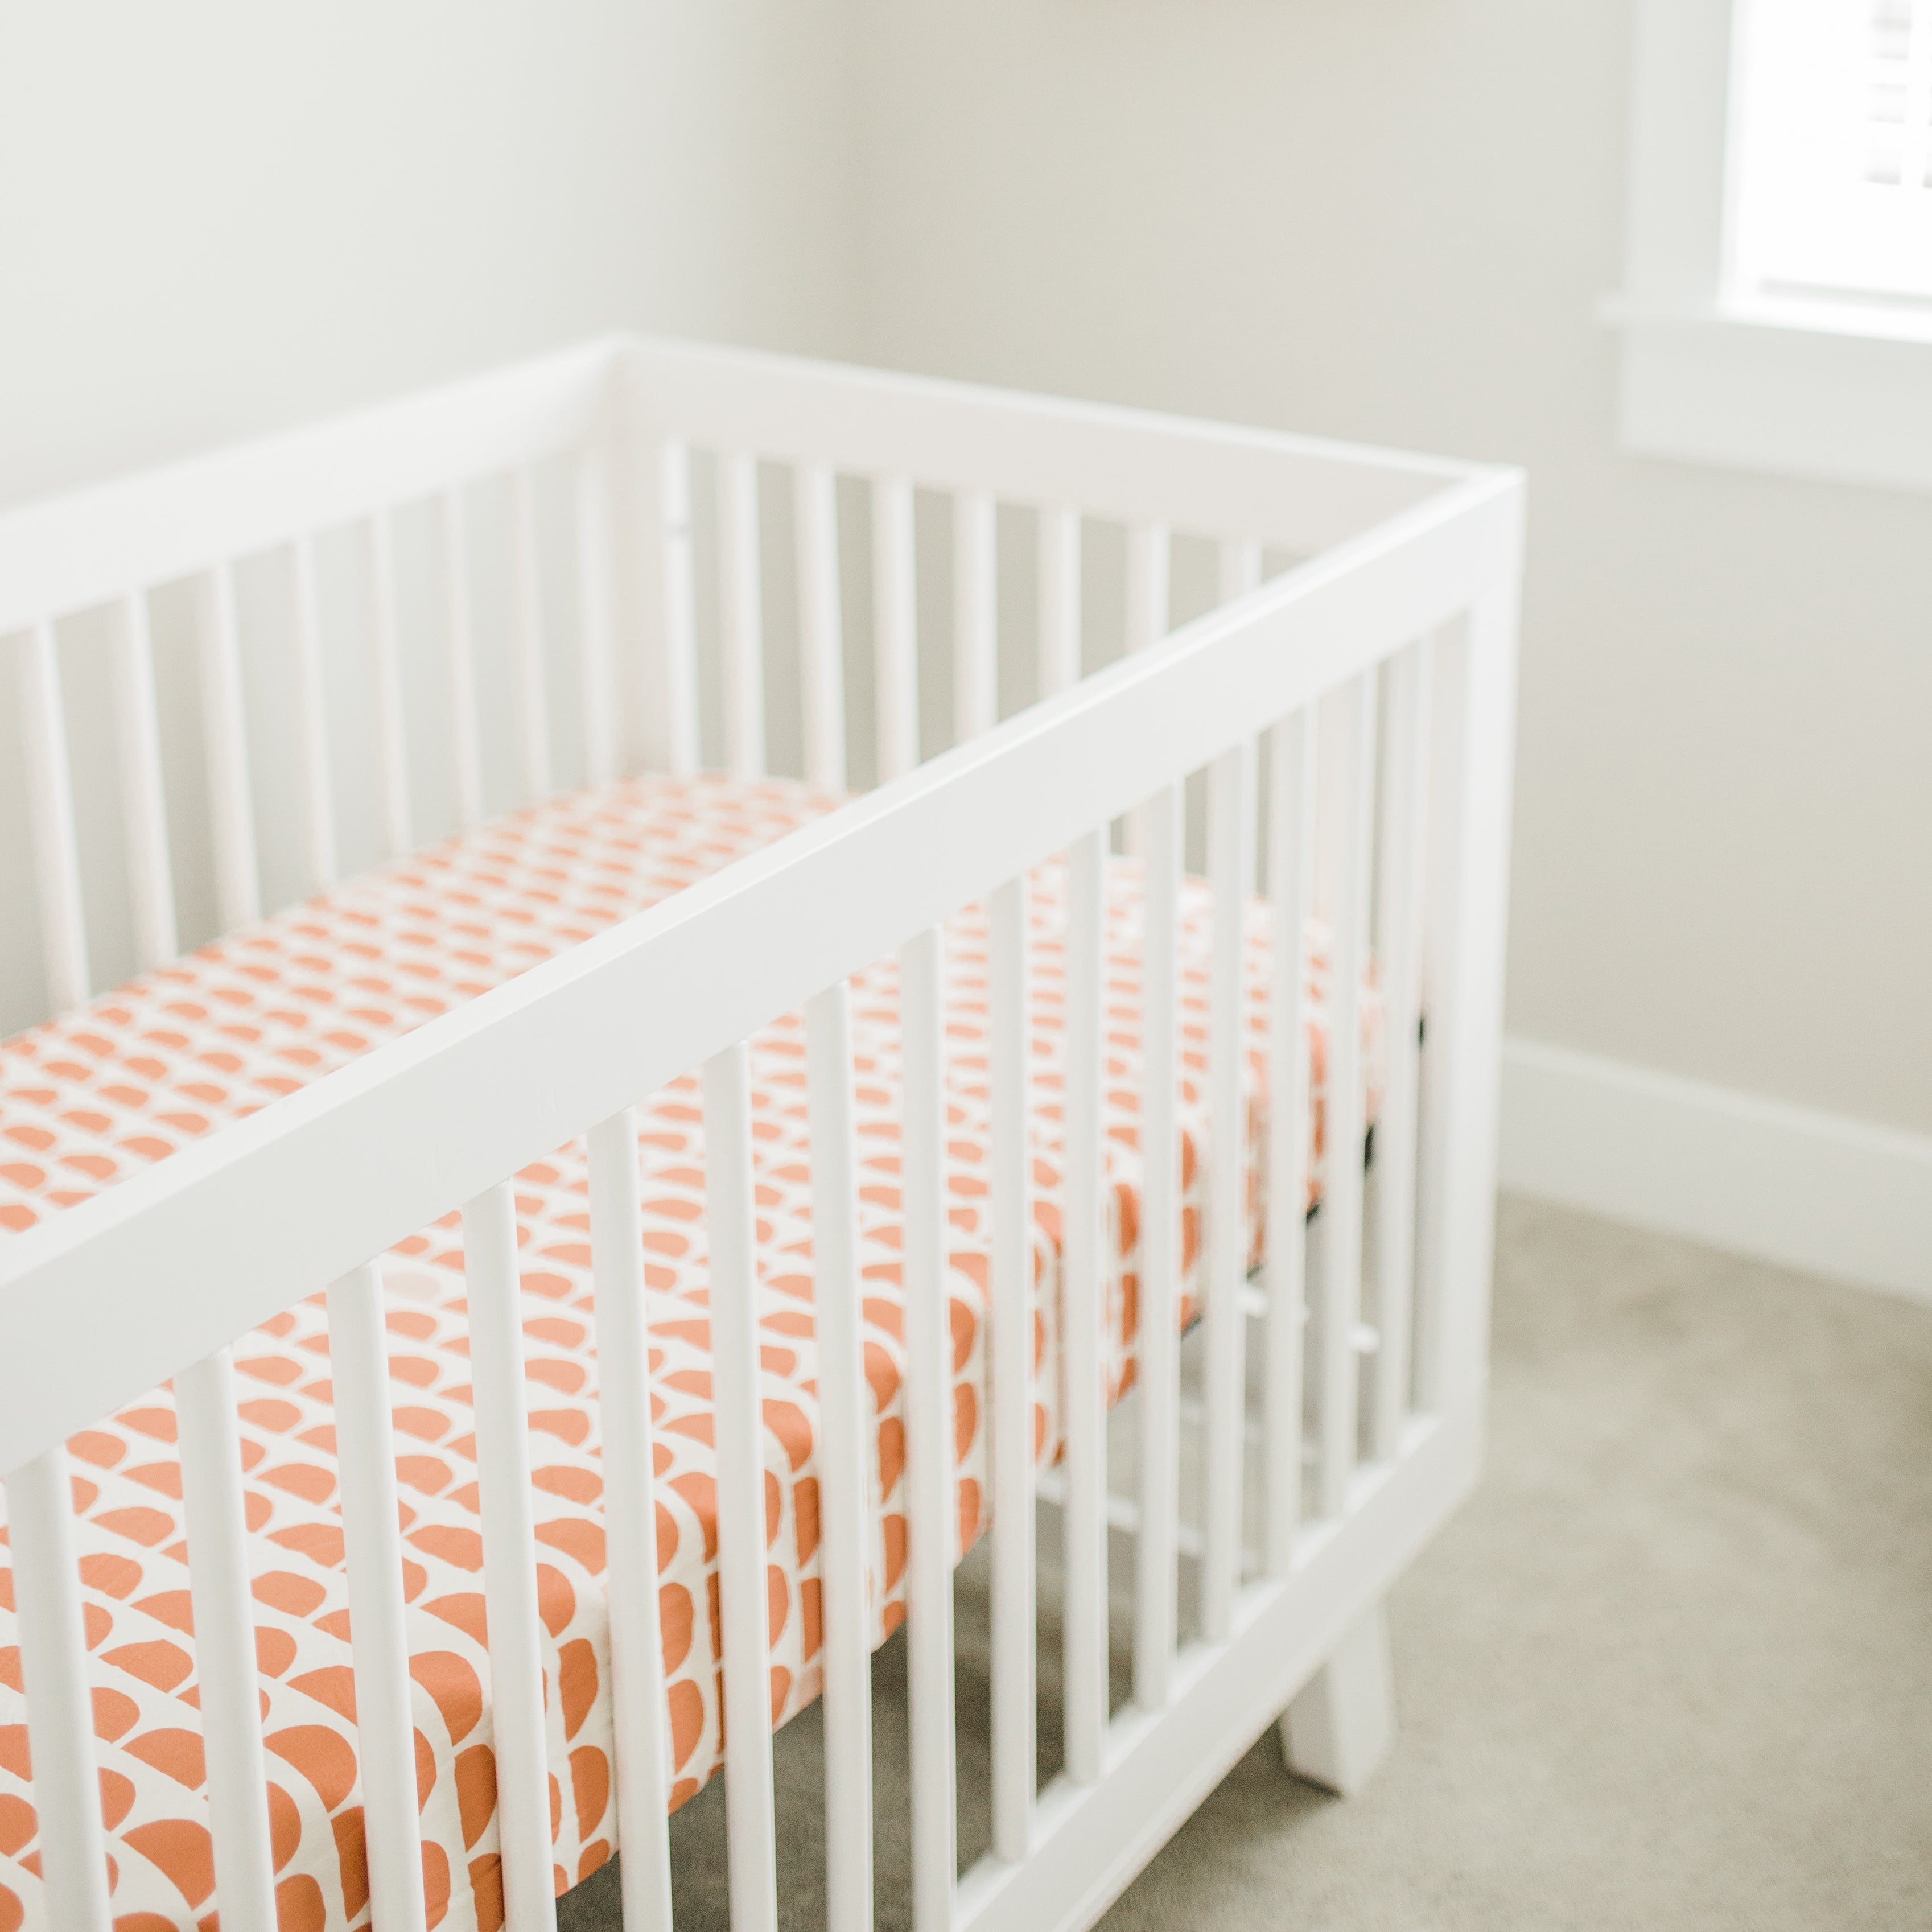 An Oolie organic cotton crib sheet with red graphic print installed on a mattress in a white crib in a baby&#39;s room.